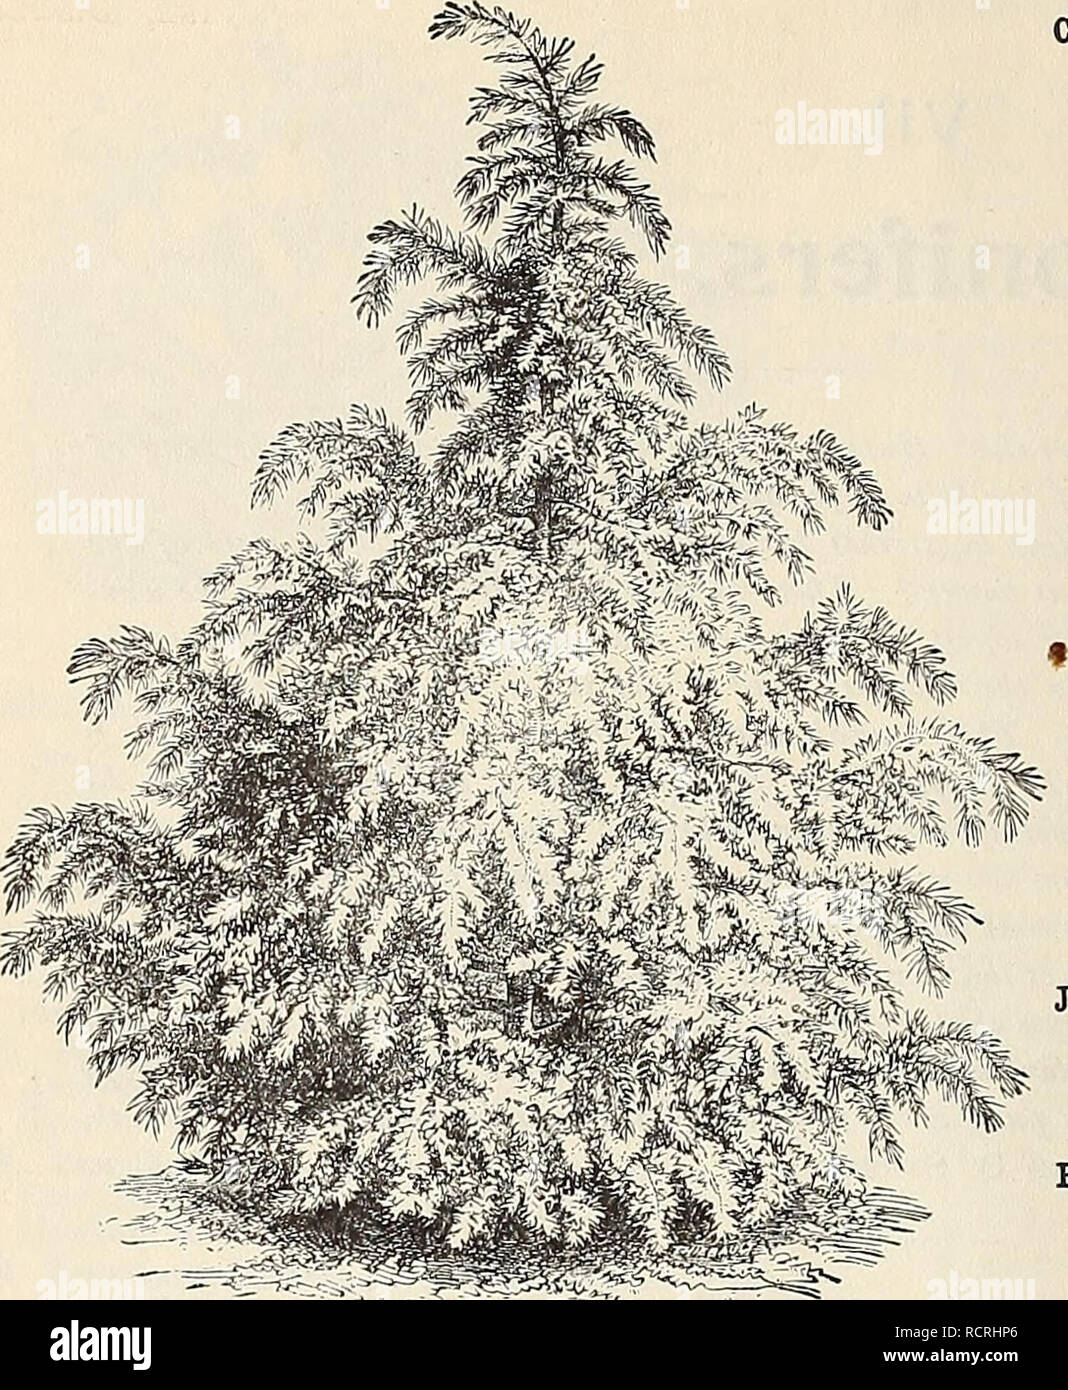 . Descriptive and illustrated catalogue and manual / Royal Palm Nurseries. Nurseries (Horticulture) Florida Catalogs; Tropical plants Catalogs; Fruit trees Seedlings Catalogs; Citrus fruit industry Catalogs; Fruit Catalogs; Plants, Ornamental Catalogs. 40 Reasoner Bros., Oneco, Florida.. CEDRUS DEODARA. CASTJARINA torulosa. New South Wales and Queensland. Height, 70 feet; a valuable spe- cies. A very hardy sort, and one that closely resembles C. termissima. 35 cents each, 13.50 per dozen. (From open ground.) CEDBUS Atlantica. Atlantic Cedar, from the Azores. A hardy, rare conifer, slightly re- Stock Photo